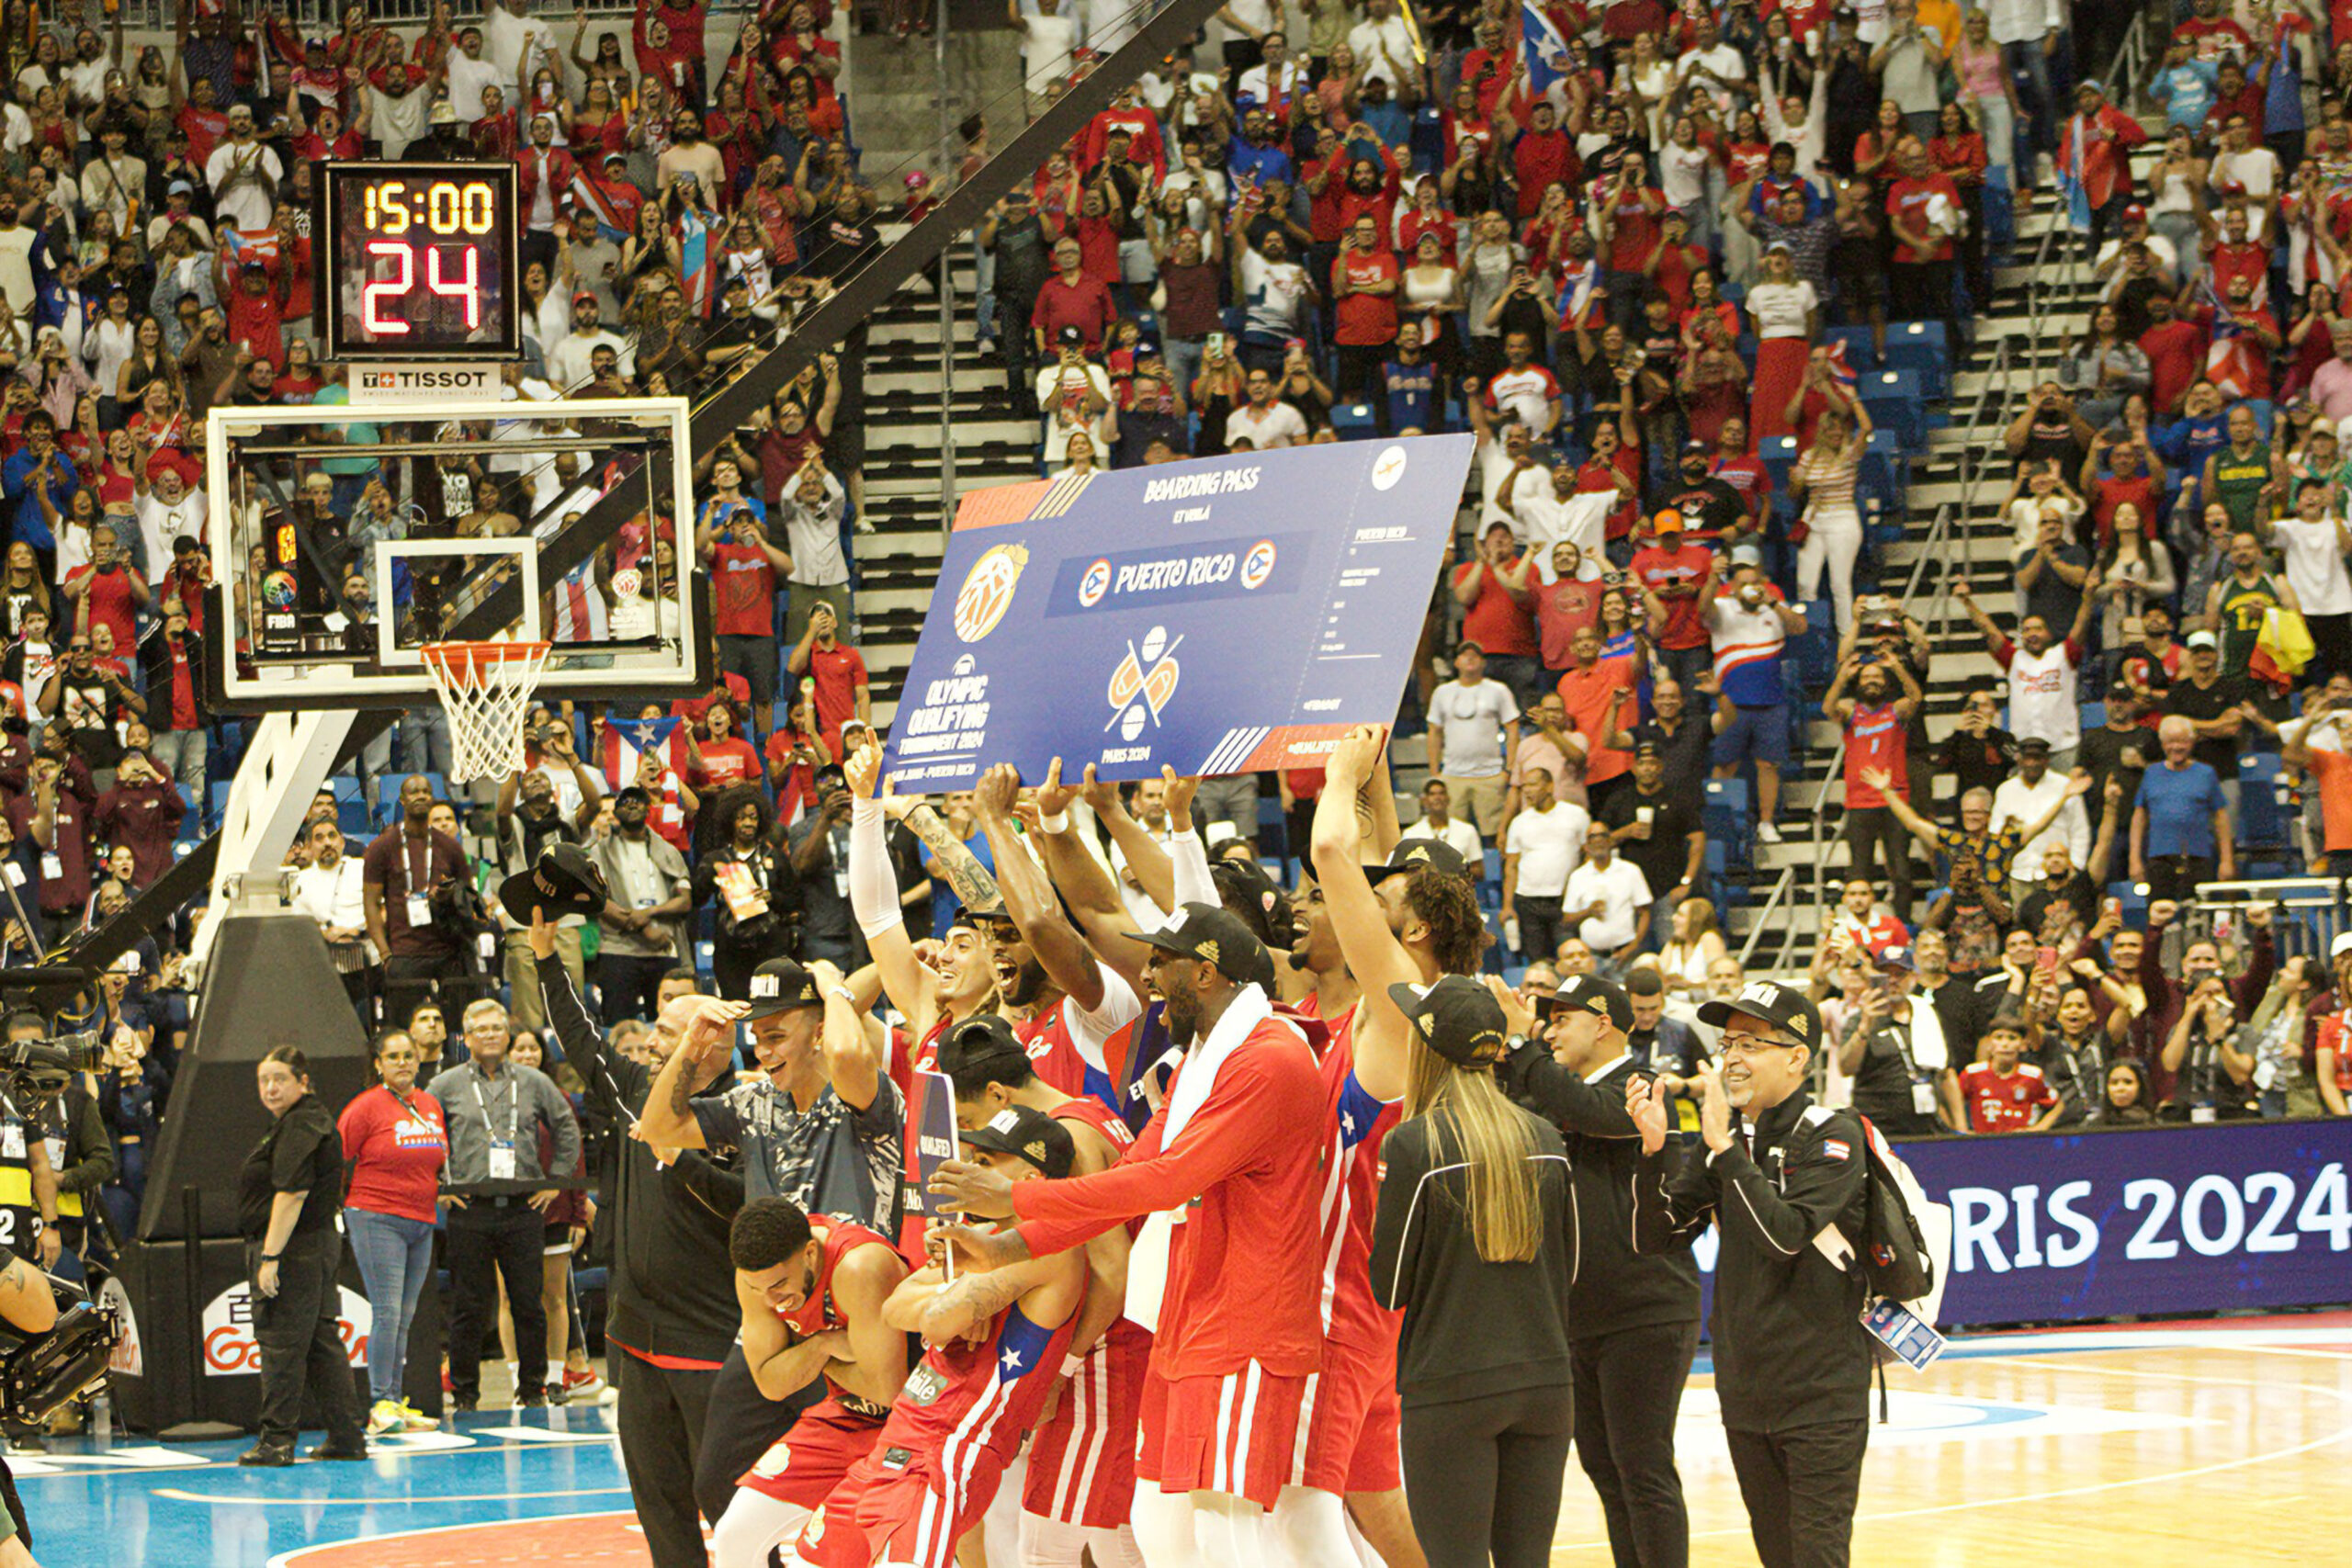 PUERTO RICO BASKETBALL COMPLETES HISTORIC QUALIFICATION TO PARIS 2024